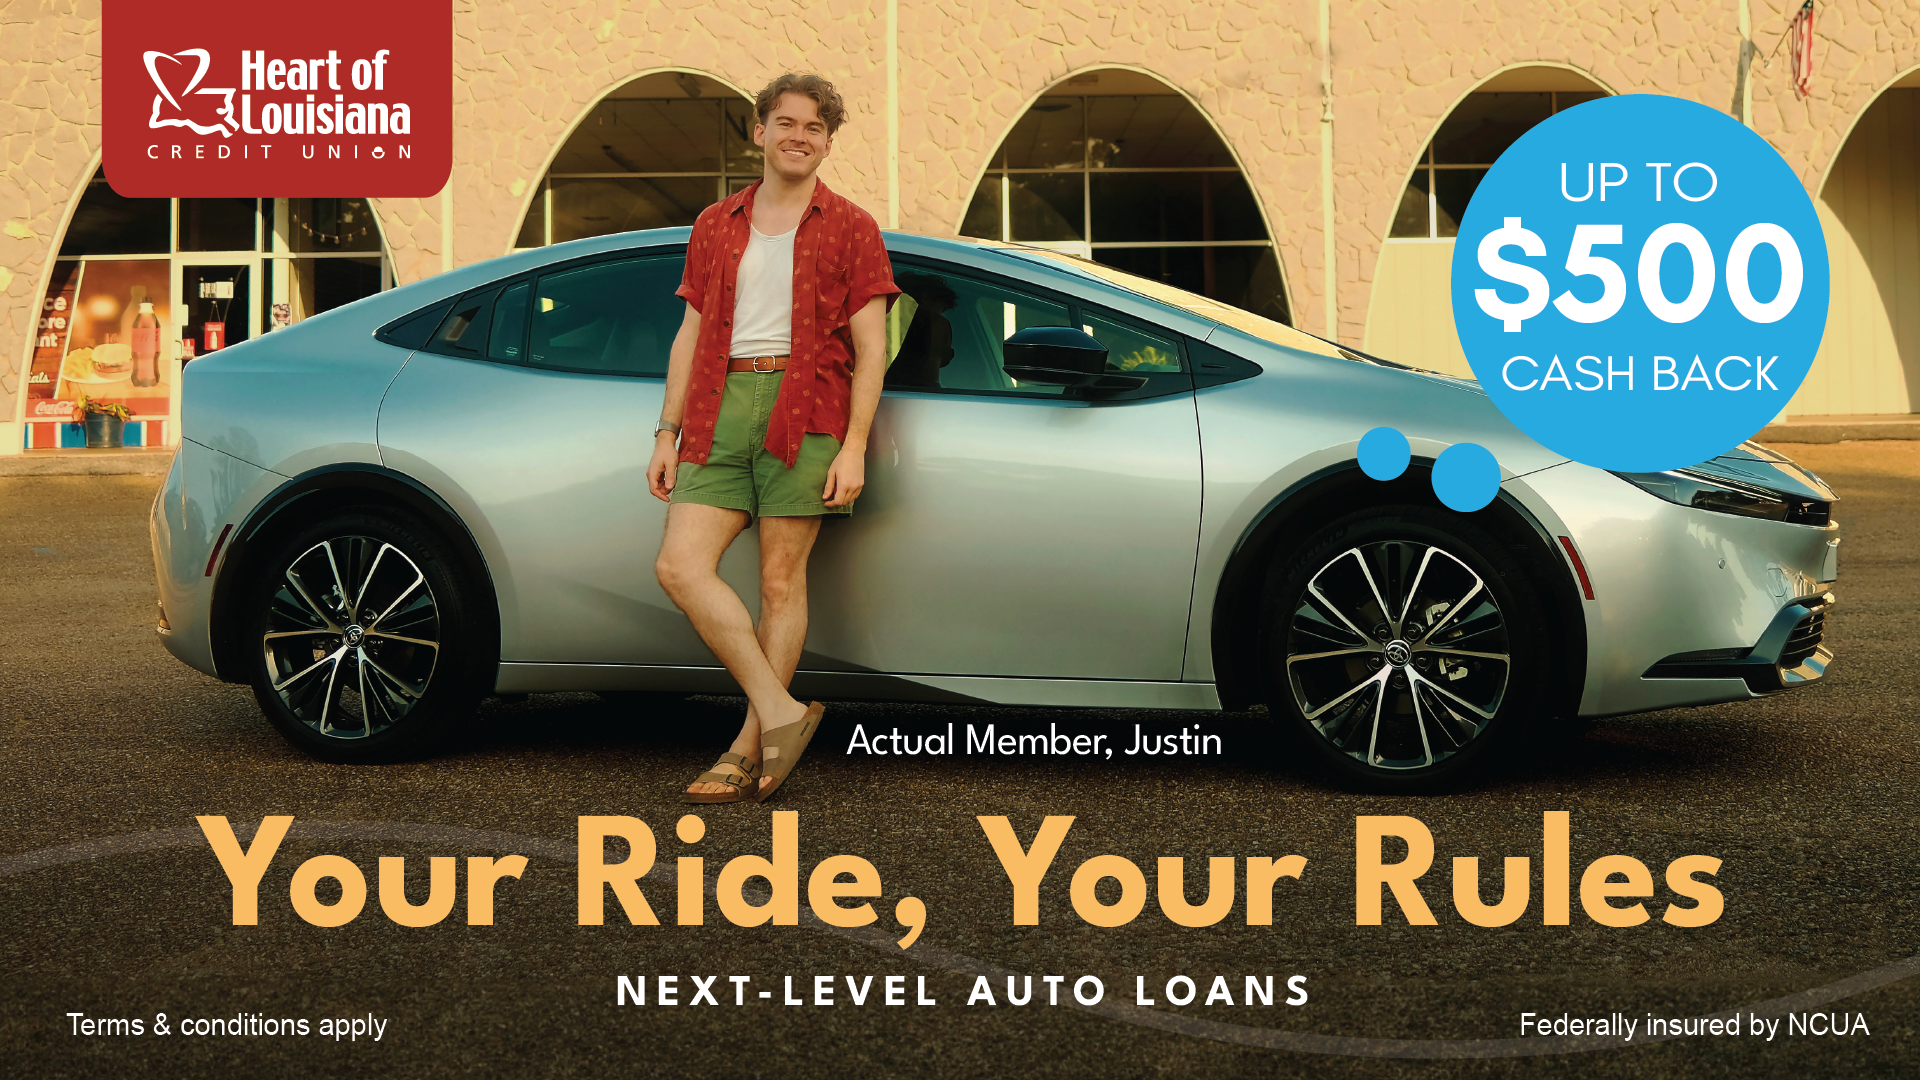 Auto Loan Solutions - up to $500 cashback